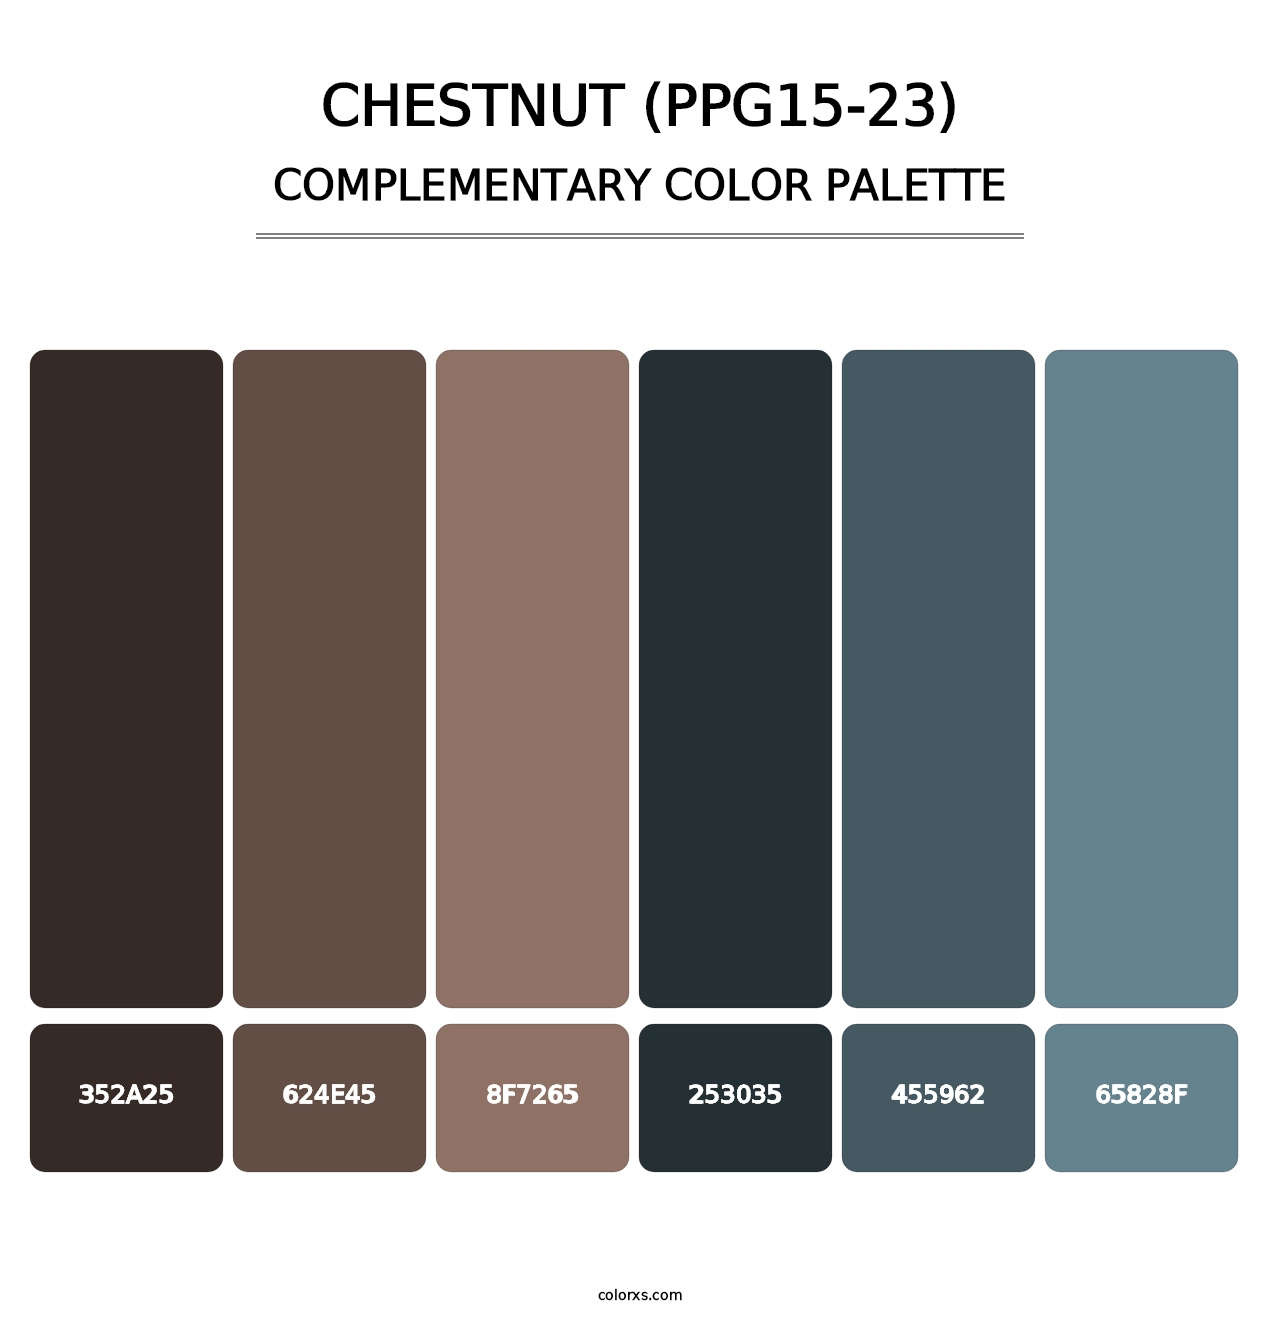 Chestnut (PPG15-23) - Complementary Color Palette